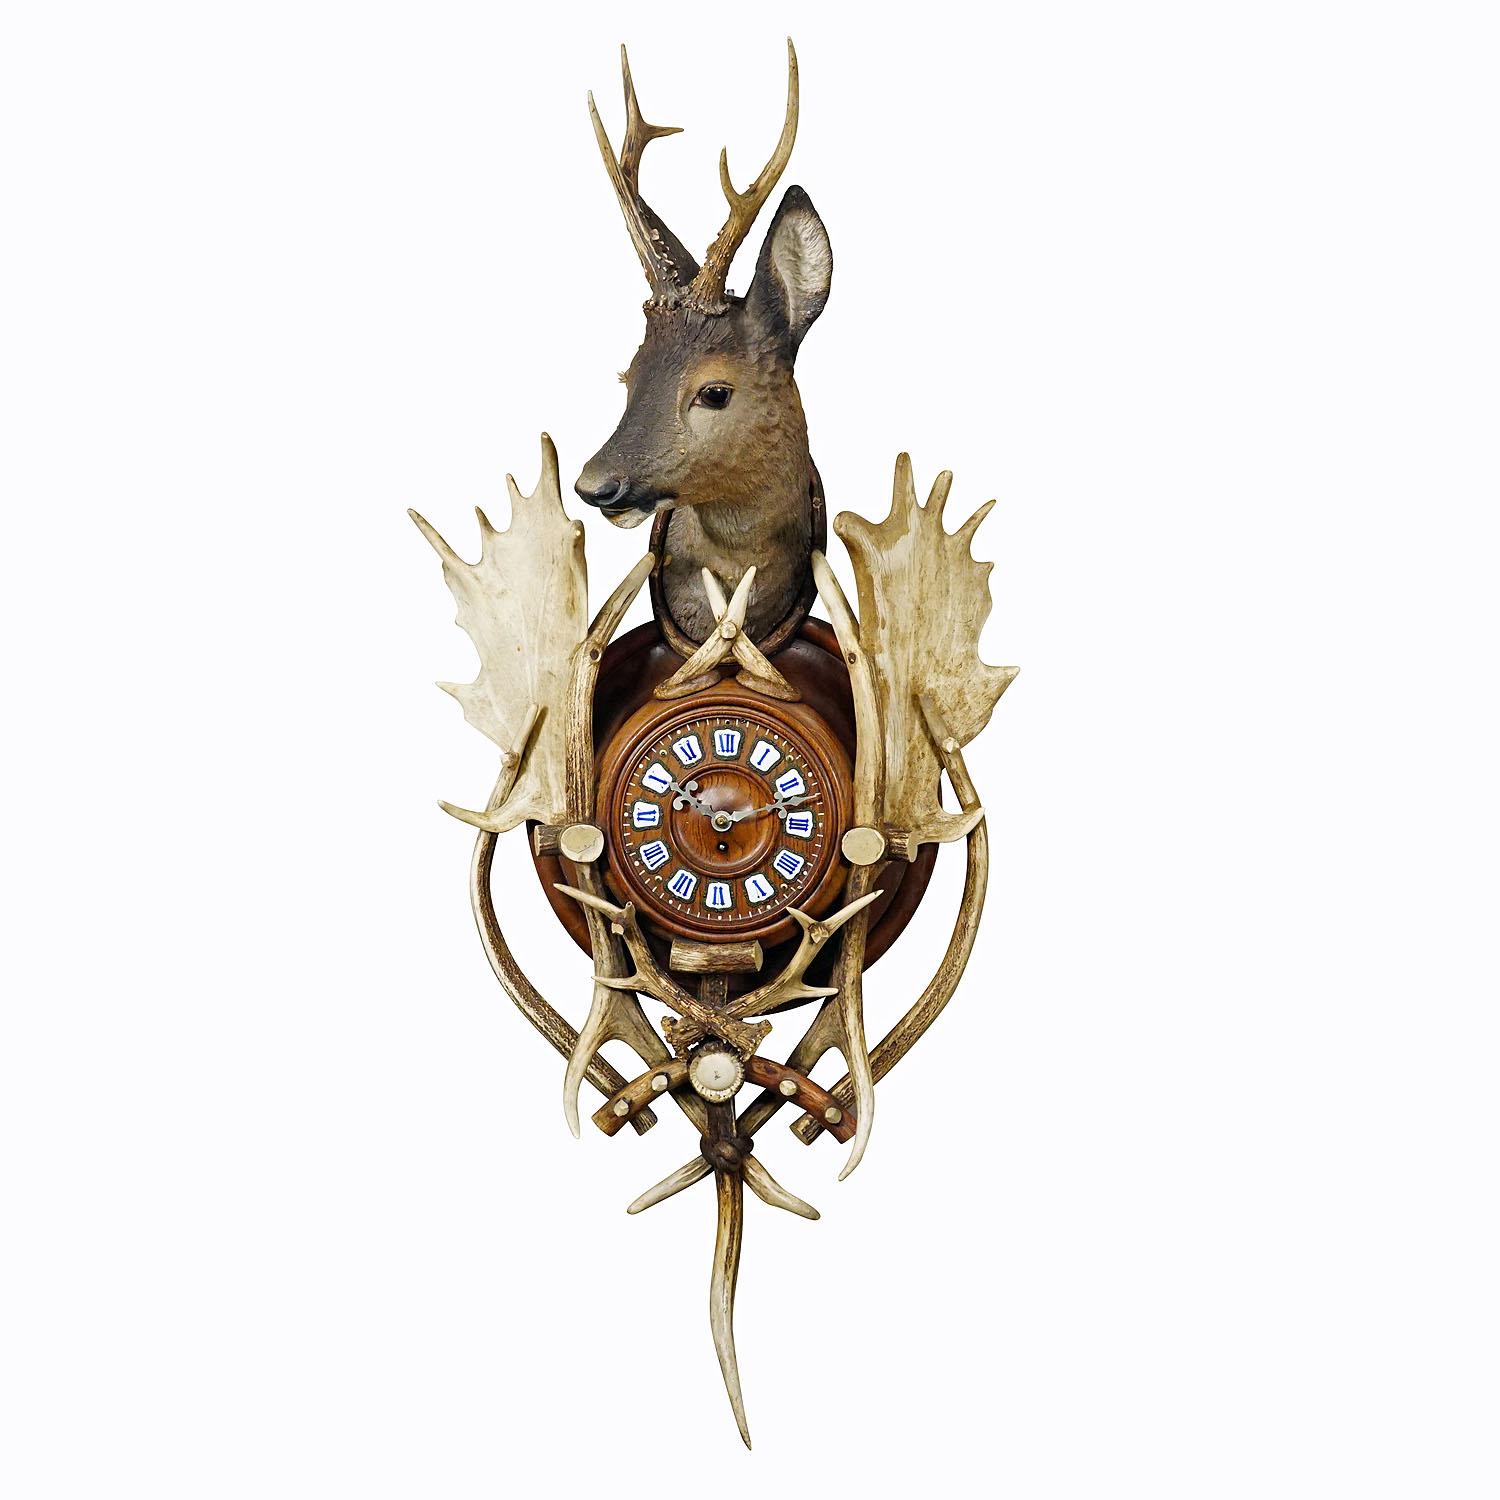 Antique Cabin Antler Wall Clock with Deer Head Austria ca. 1900

A large rustic antler wall clock. The wooden case is richly decorated with plaster applications, a plaster deer head, antlers from the deer and fallow deer and a turned hron rose.